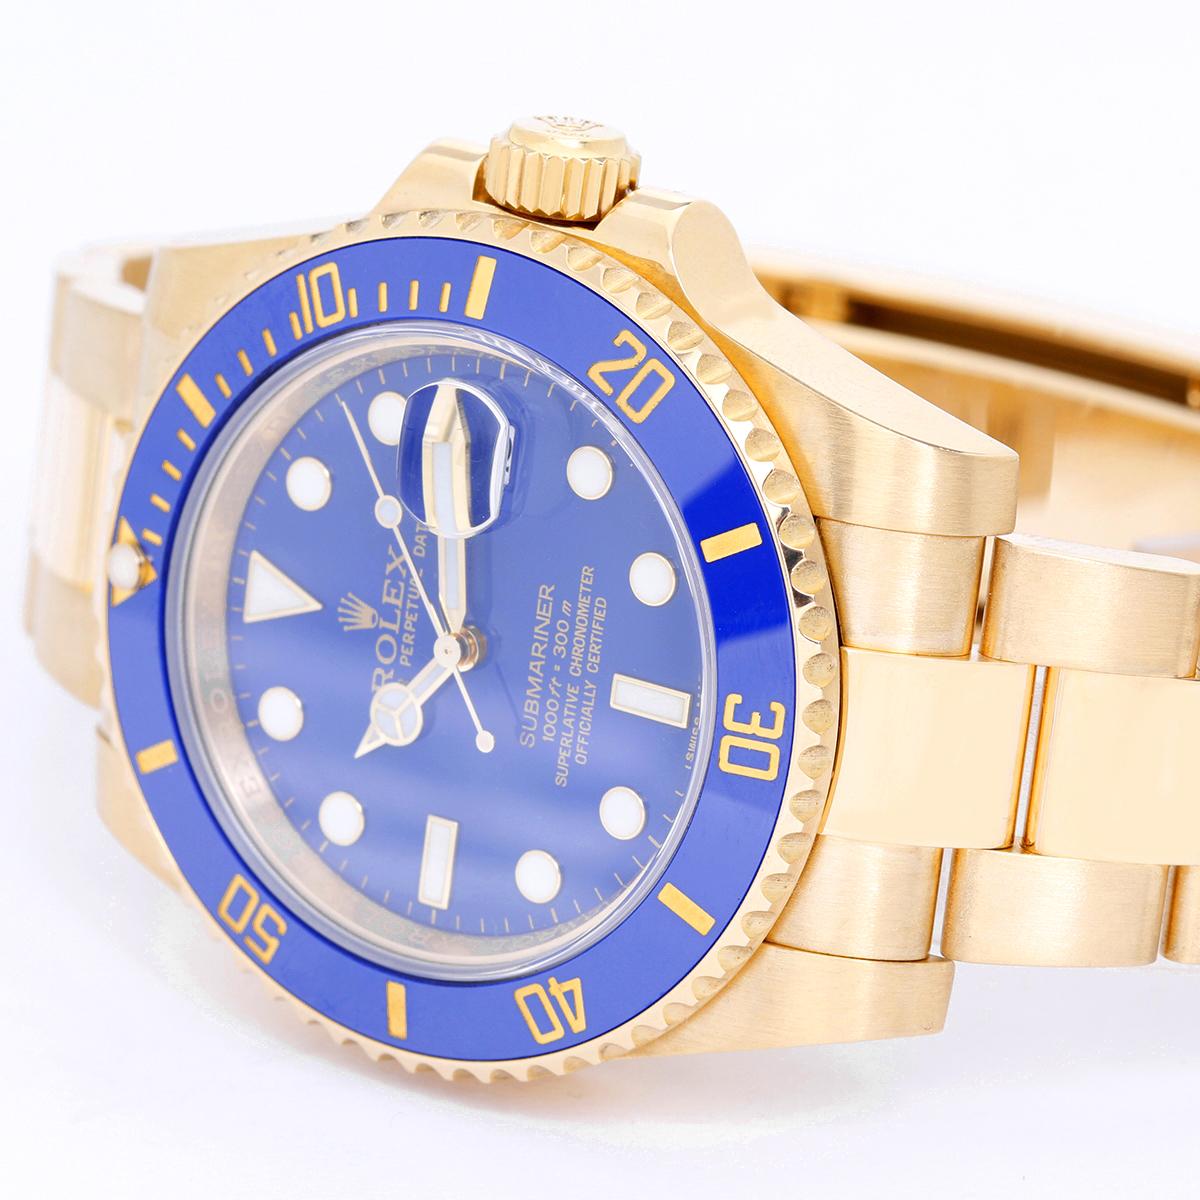 Rolex Submariner 18k Yellow Gold Men's Watch Blue Dial 116618 -  Automatic winding, Quickset, sapphire crystal. 18k yellow gold case and rotating with blue ceramic bezel insert  (40mm diameter). Blue dial with luminous style markers. 18k yellow gold